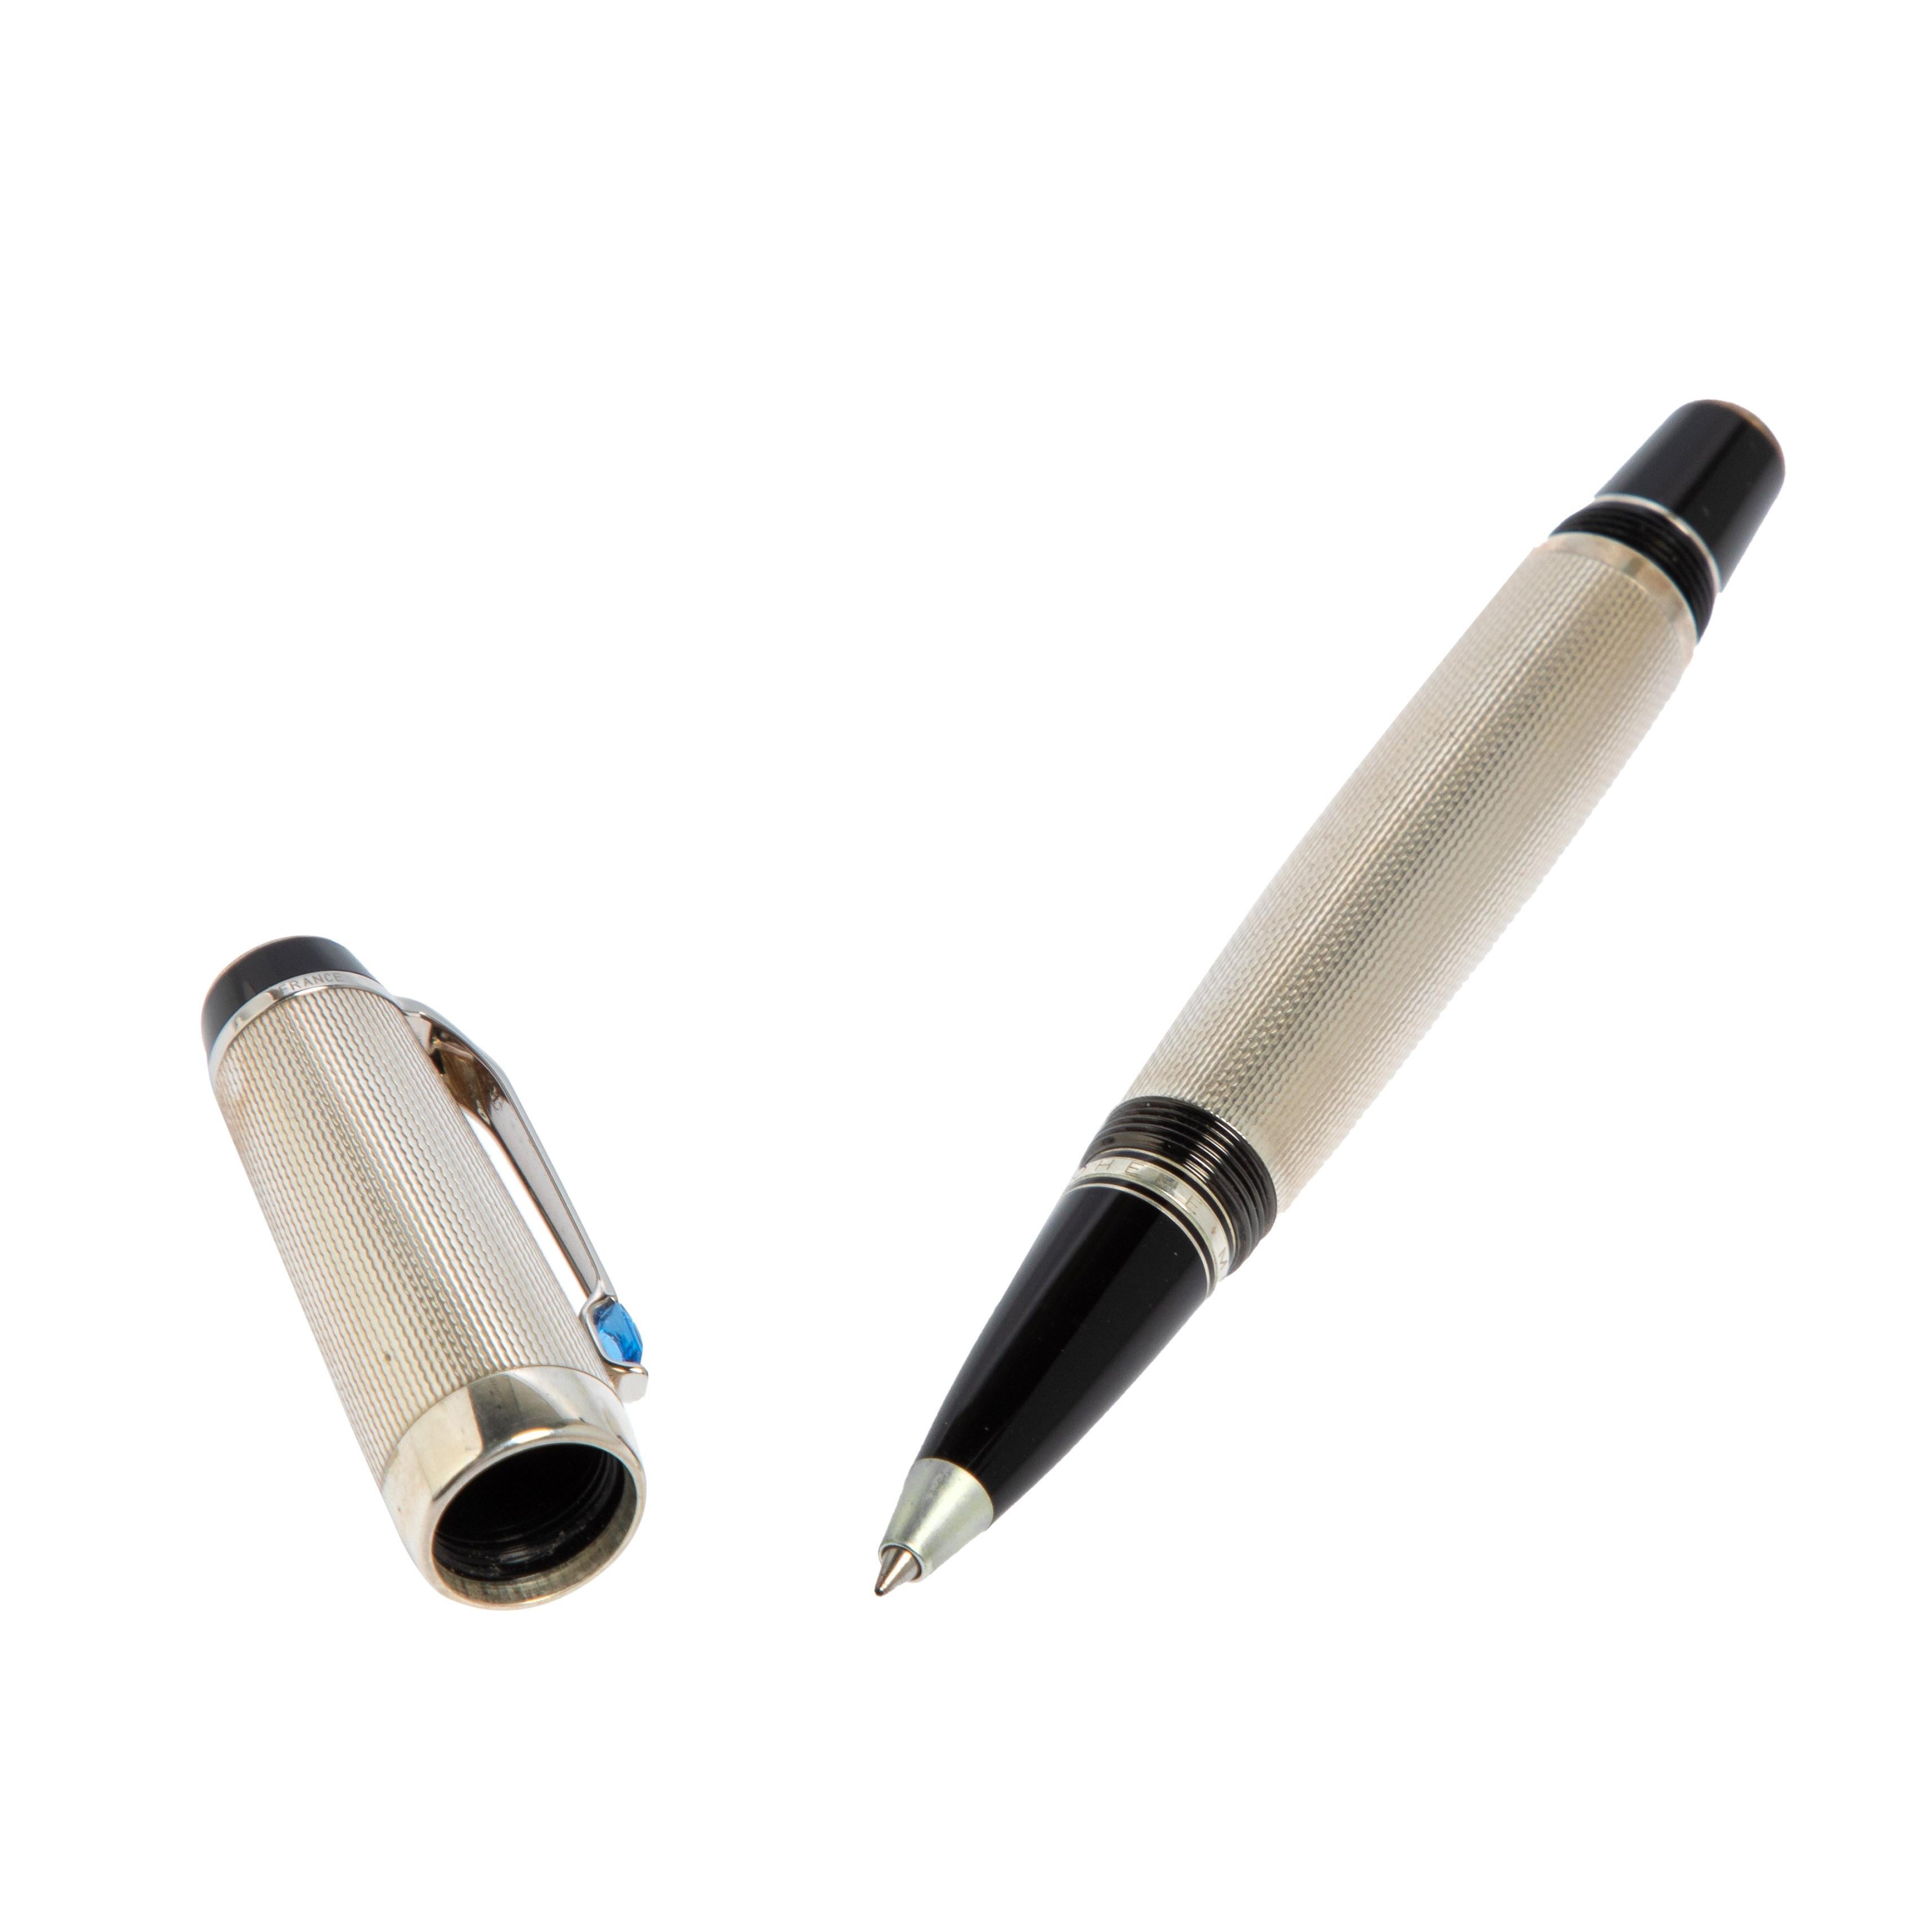 Montblanc brings you this fine rollerball pen that has been made from textured silver and fitted with black resin. It has a crystal-detailed pocket clip and the star logo on the cap. Filled with black ink, the pen is a creation that employs quality